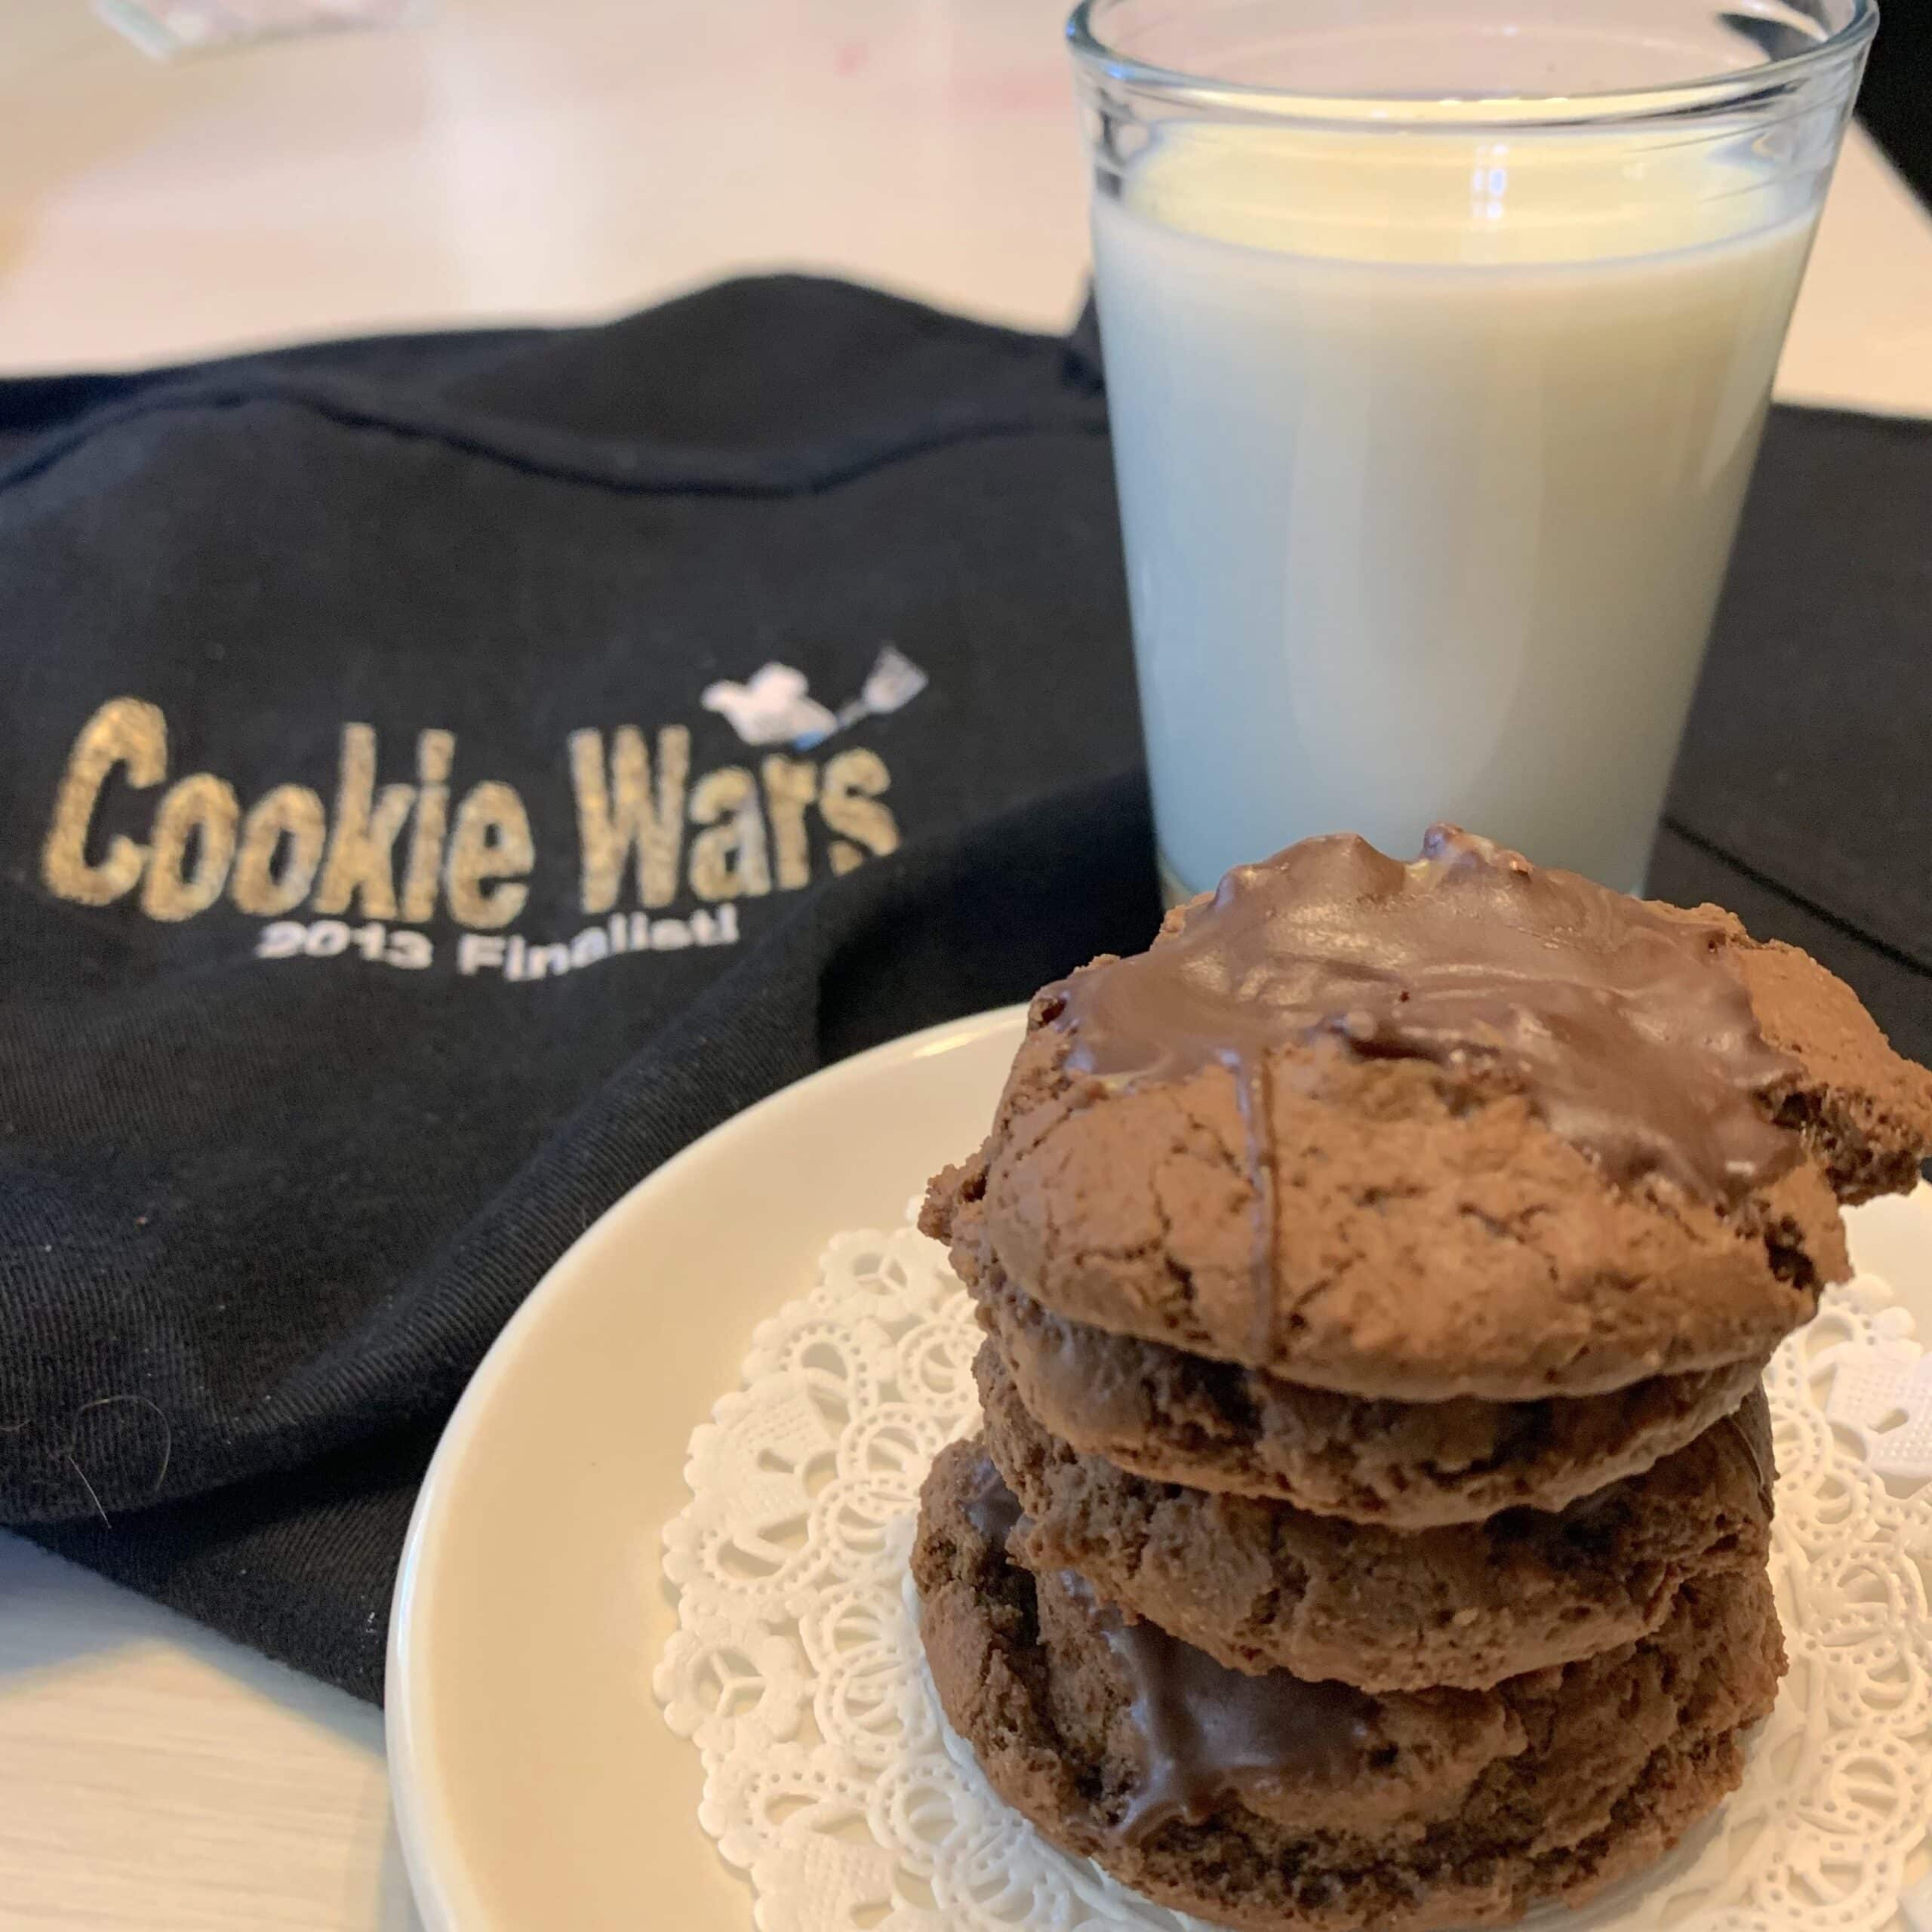 A stack of chocolate mint cookies stands on a plate next to a glass of cold, white milk. In the backrown is a black apron with "Cookie Wars" emgroidered on it